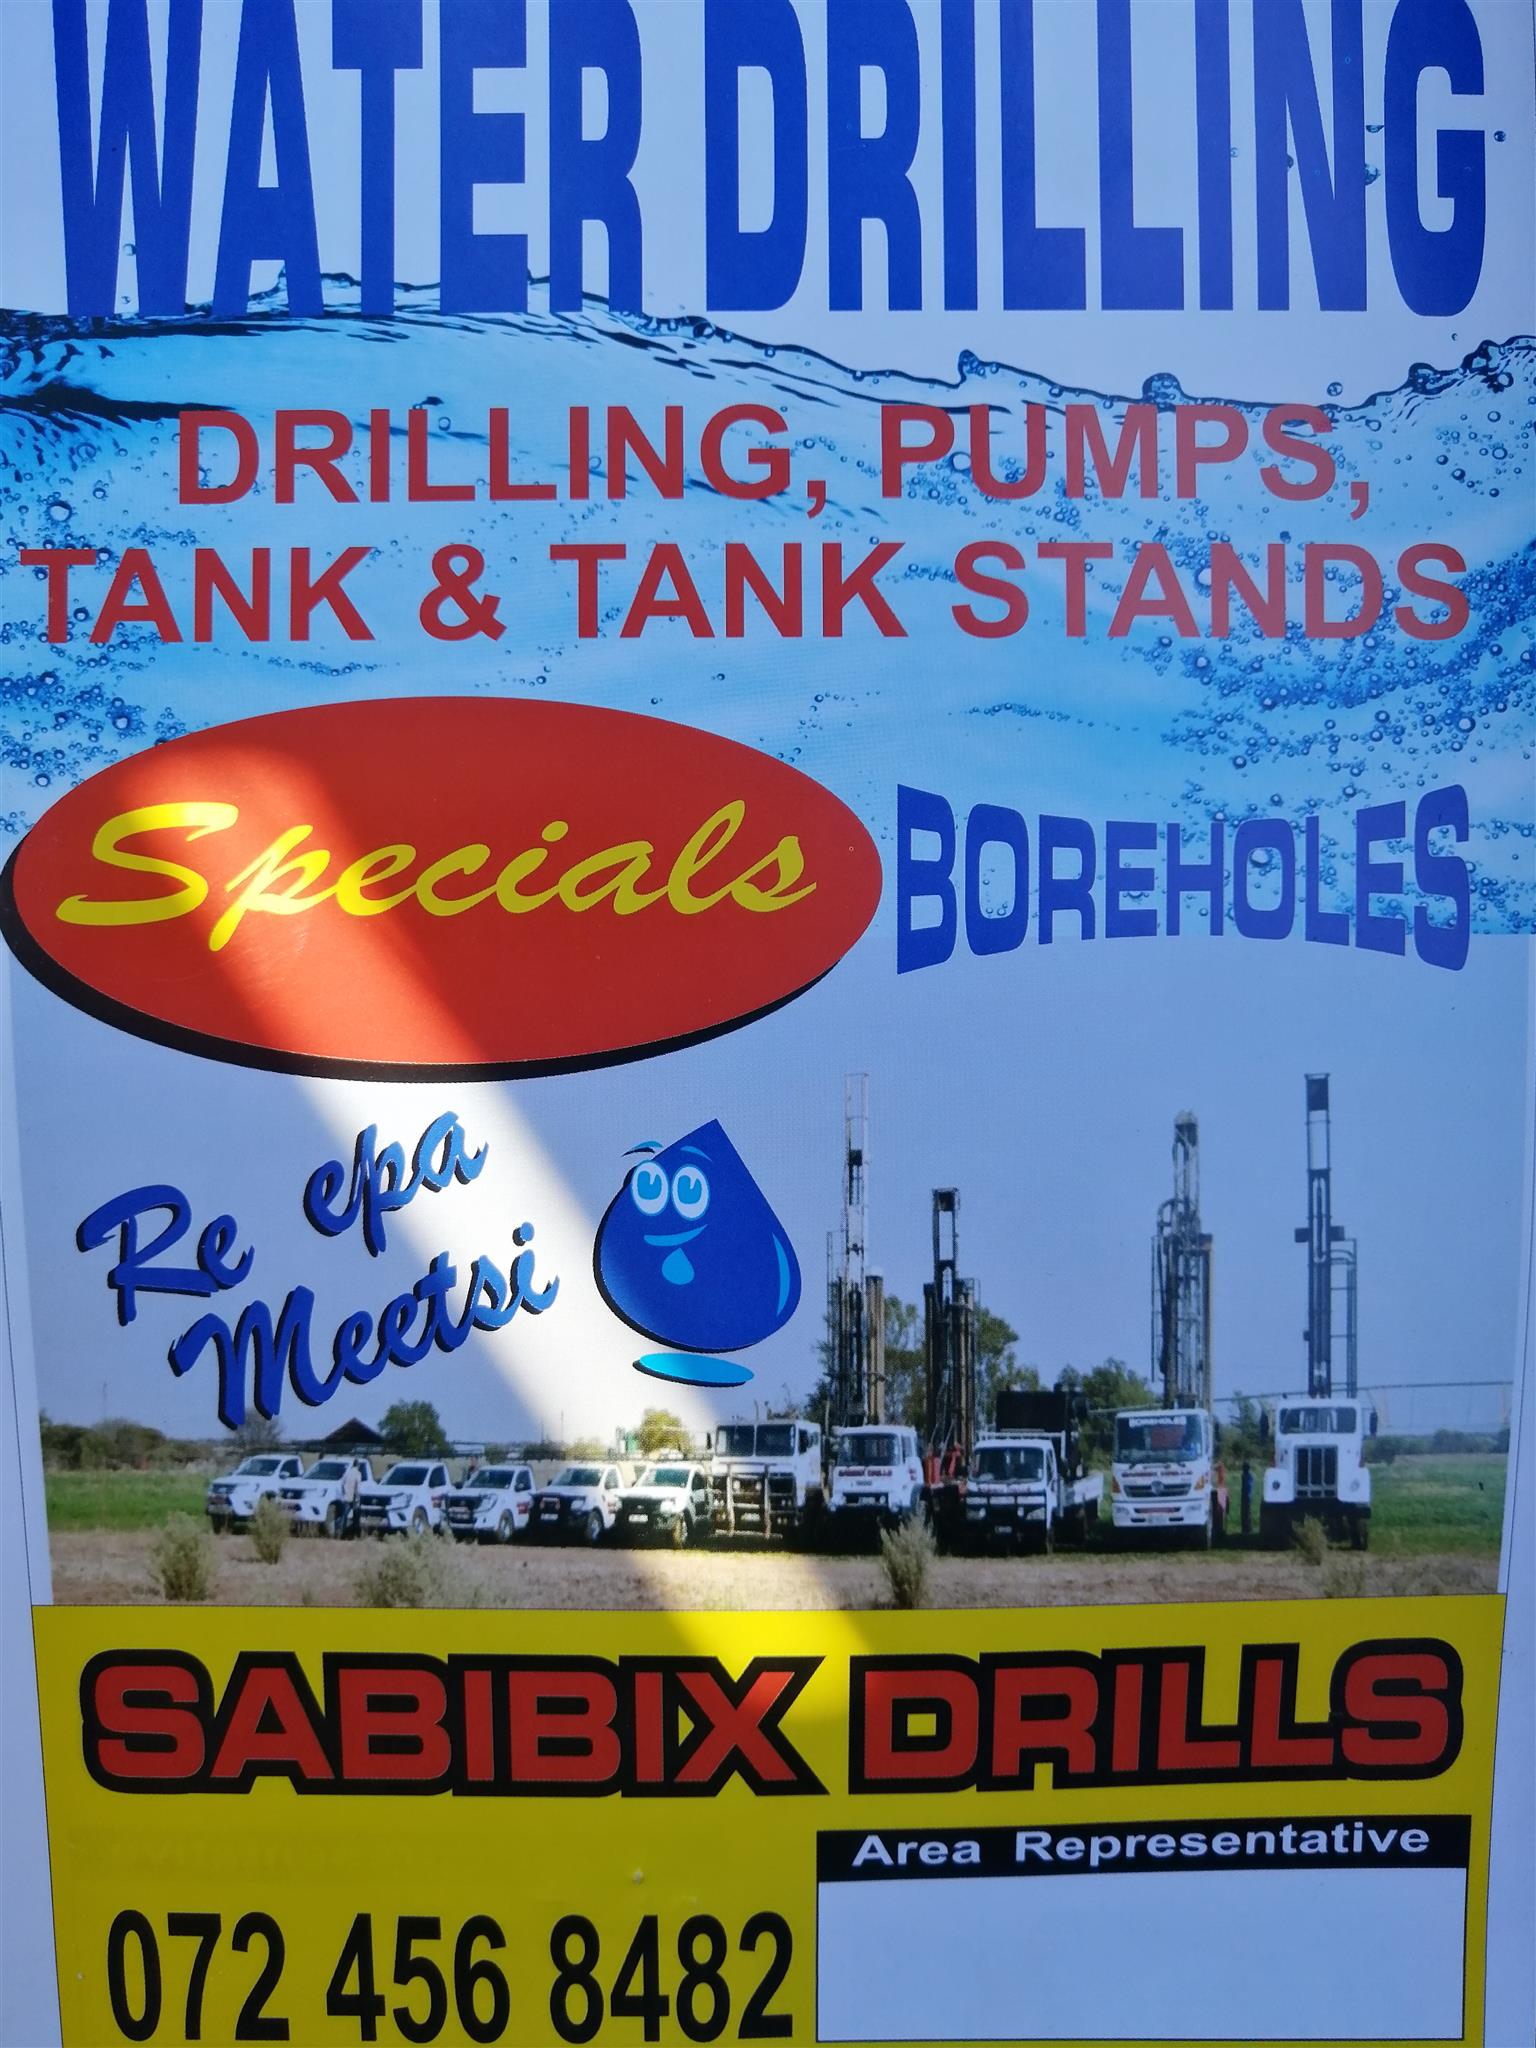 Drilling and cleaning of boreholes, pumps, tanks and tank stands